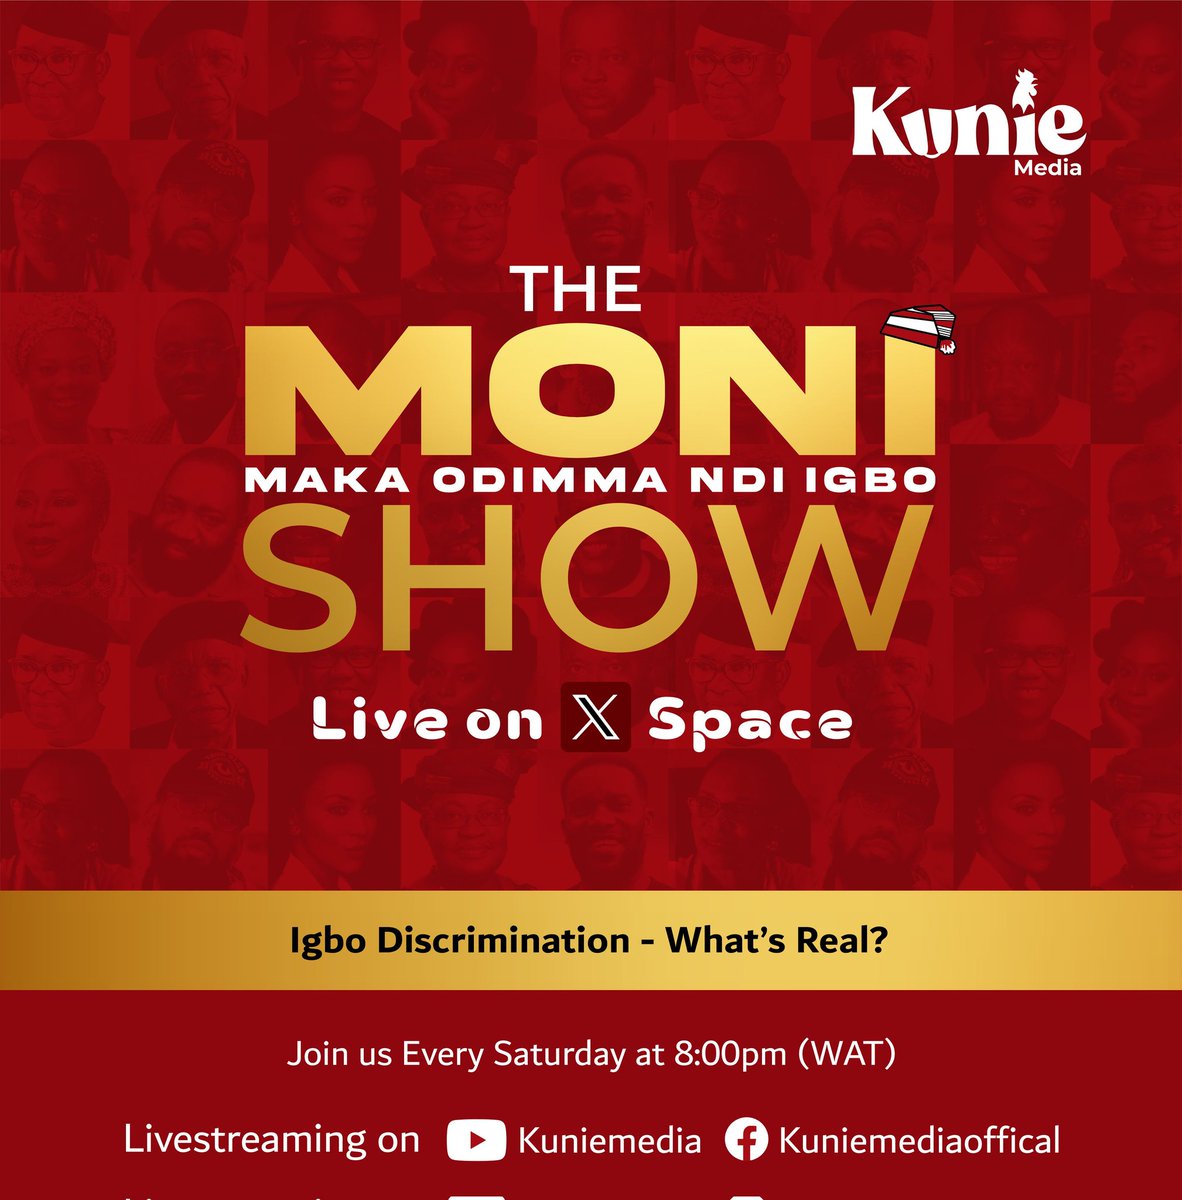 Igbo ndi oma, join us again on The MONI Show tomorrow (Saturday) at 8:00pm (WAT), on the conversation about the damaging realities of Igbo Discrimination, and explore viable ways to tackle this unjust system. #IgboAmaka #TheMONIShow